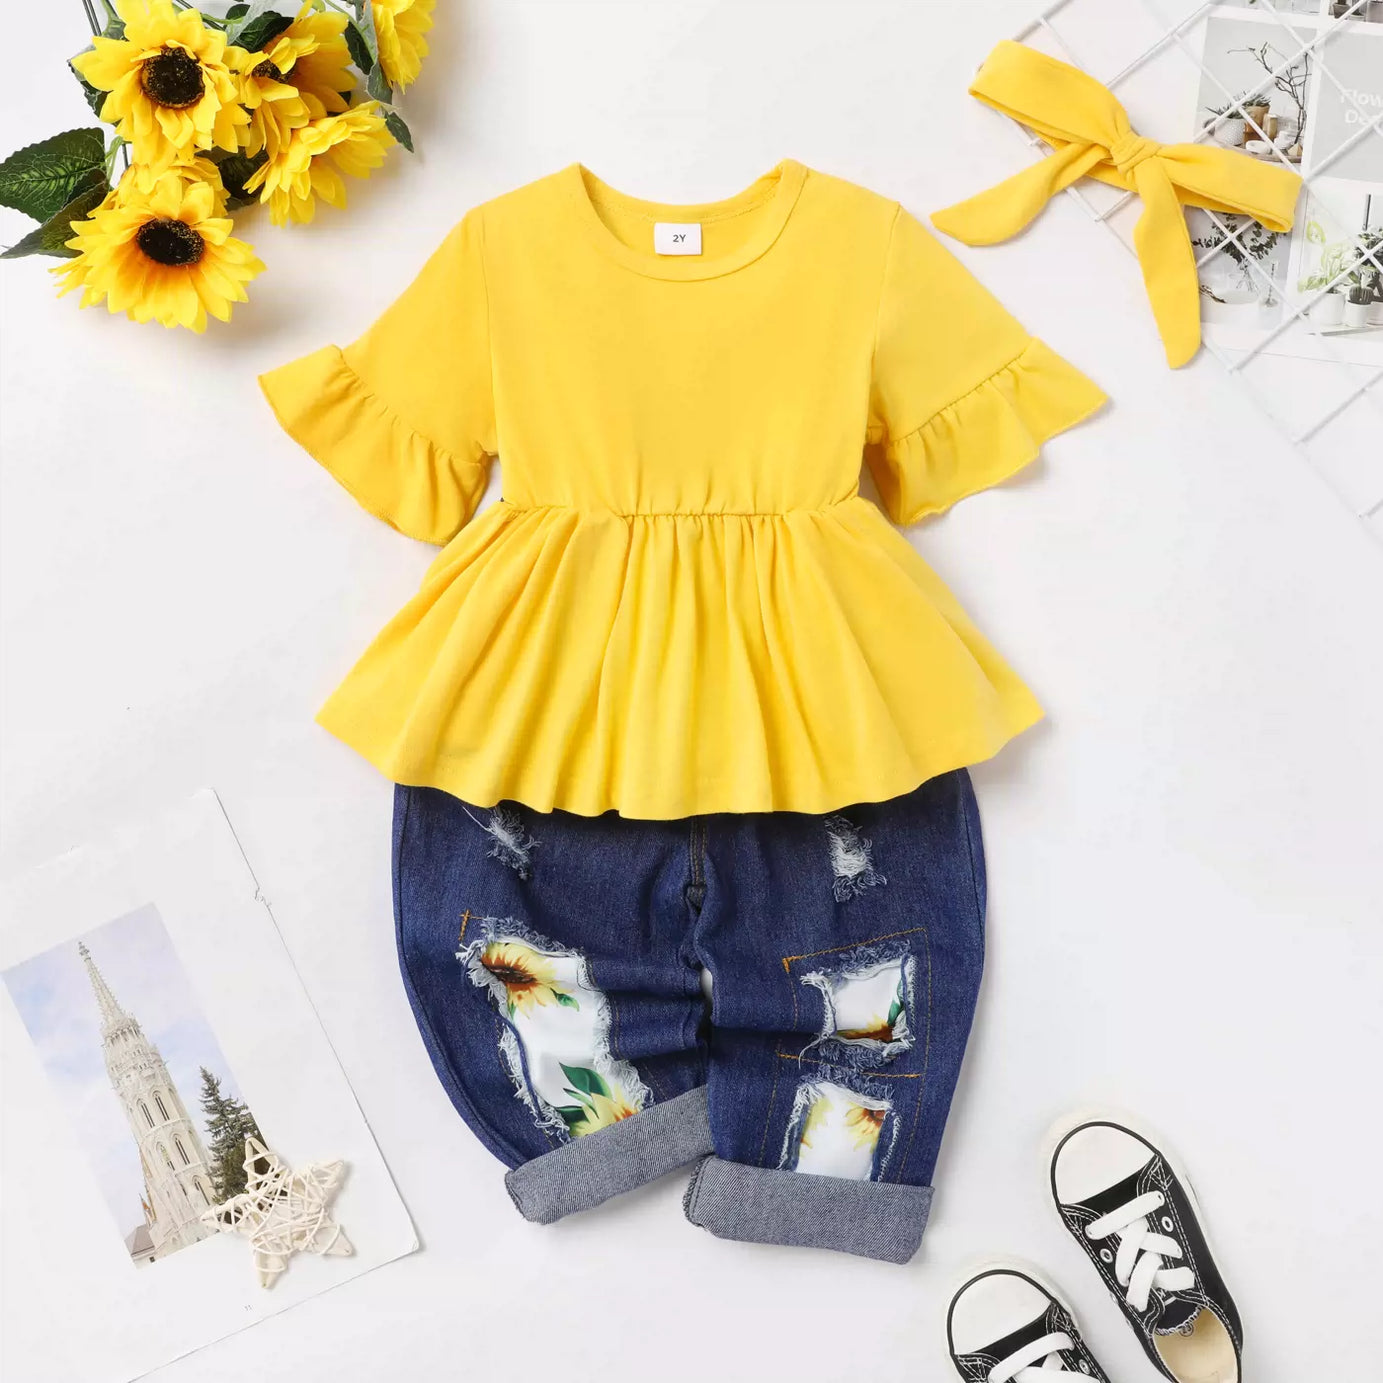 Yellow Color Girl Child Top and Bottom Set 2-6 Years